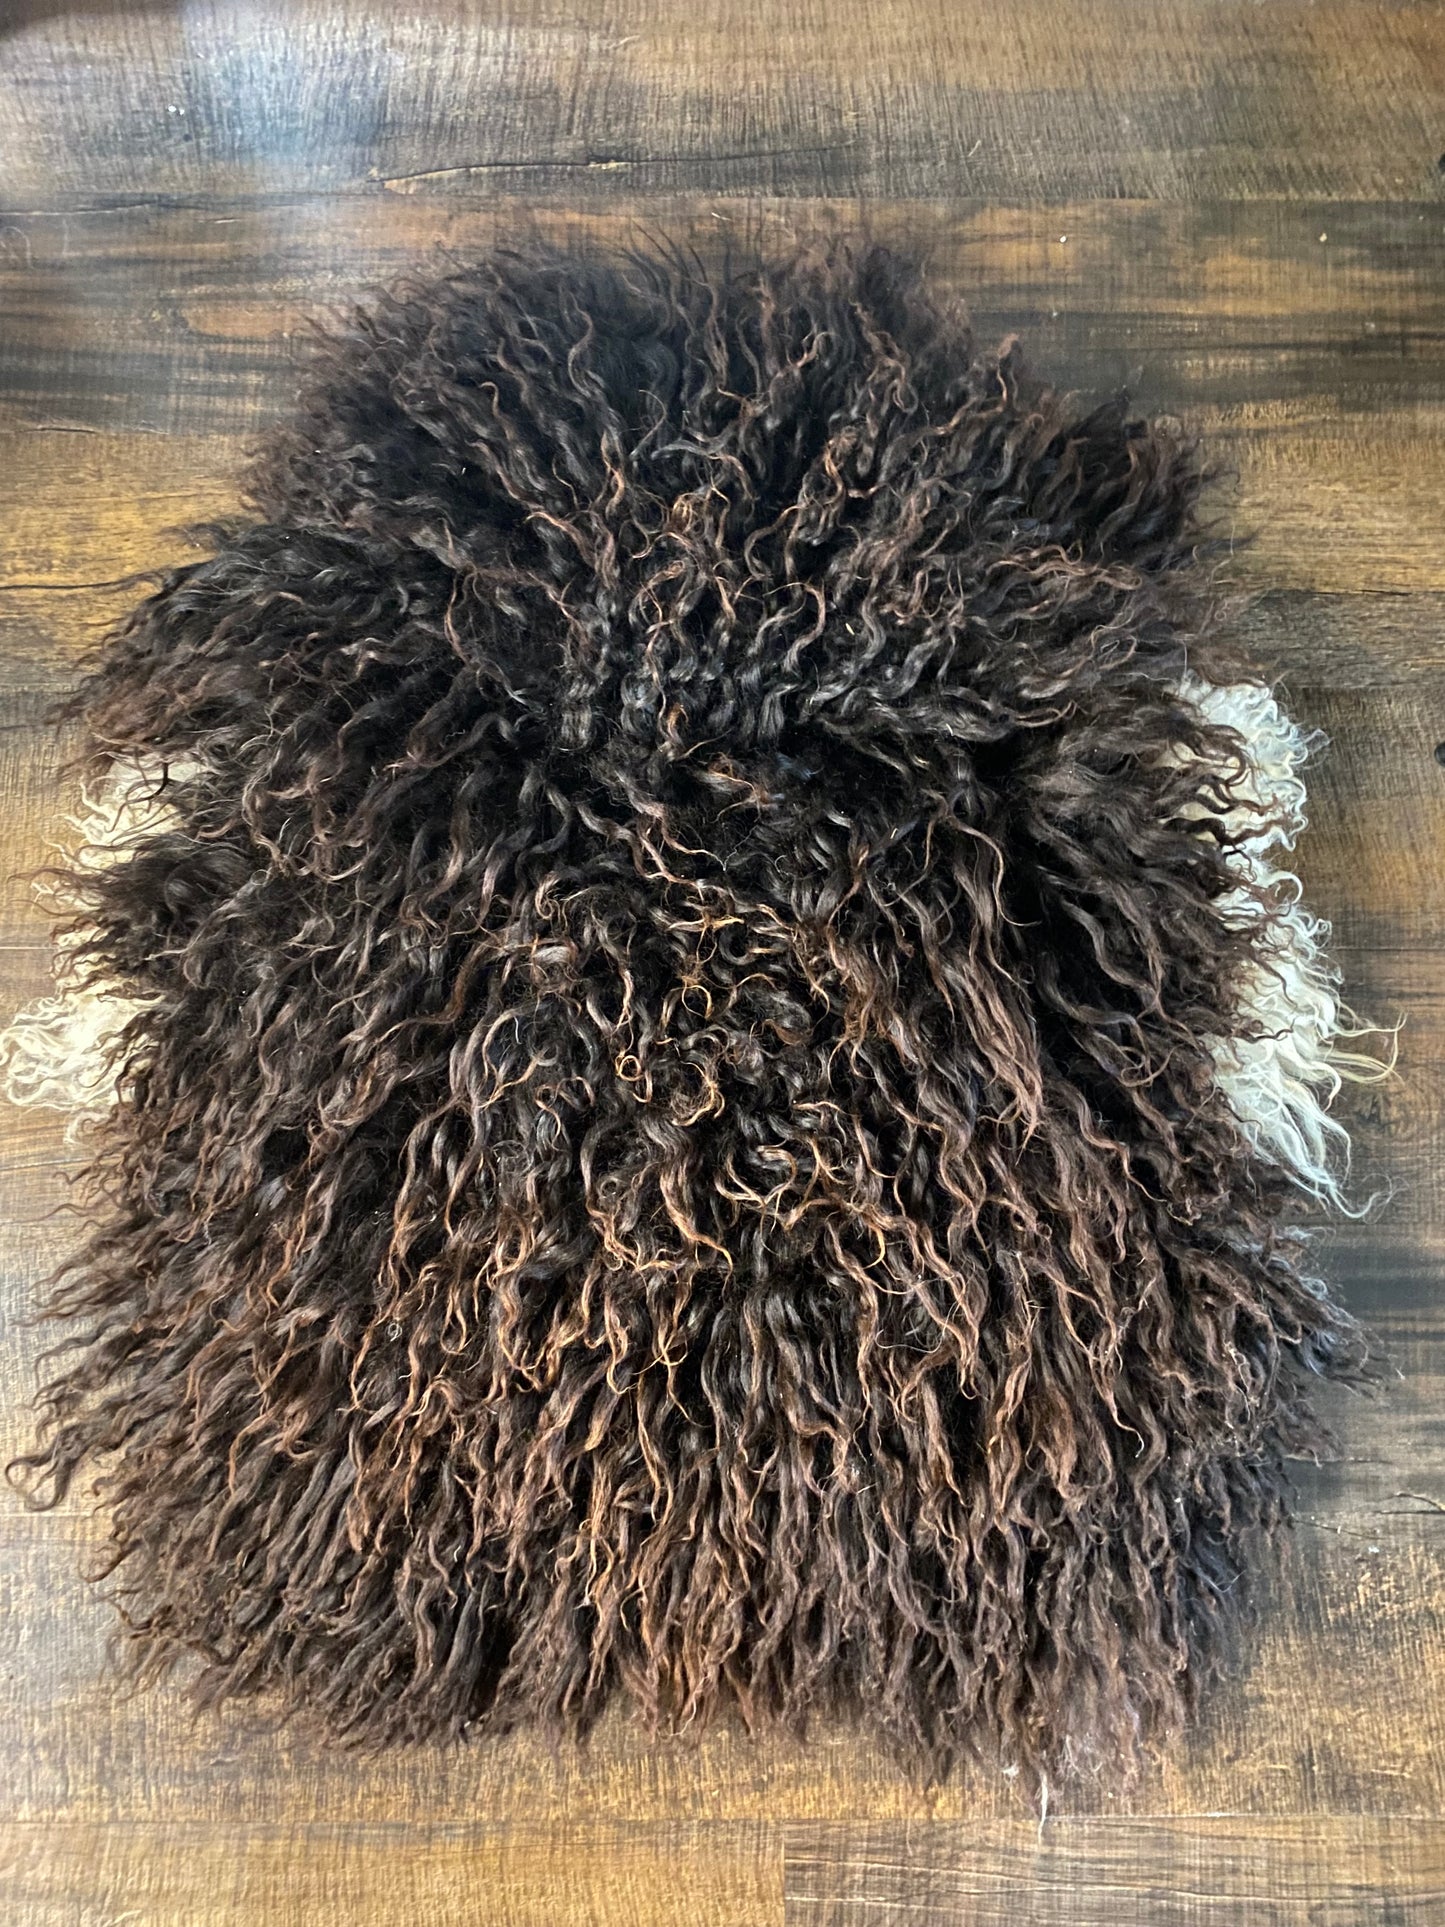 Egg Tanned Sheepskins At Home - Guidebook